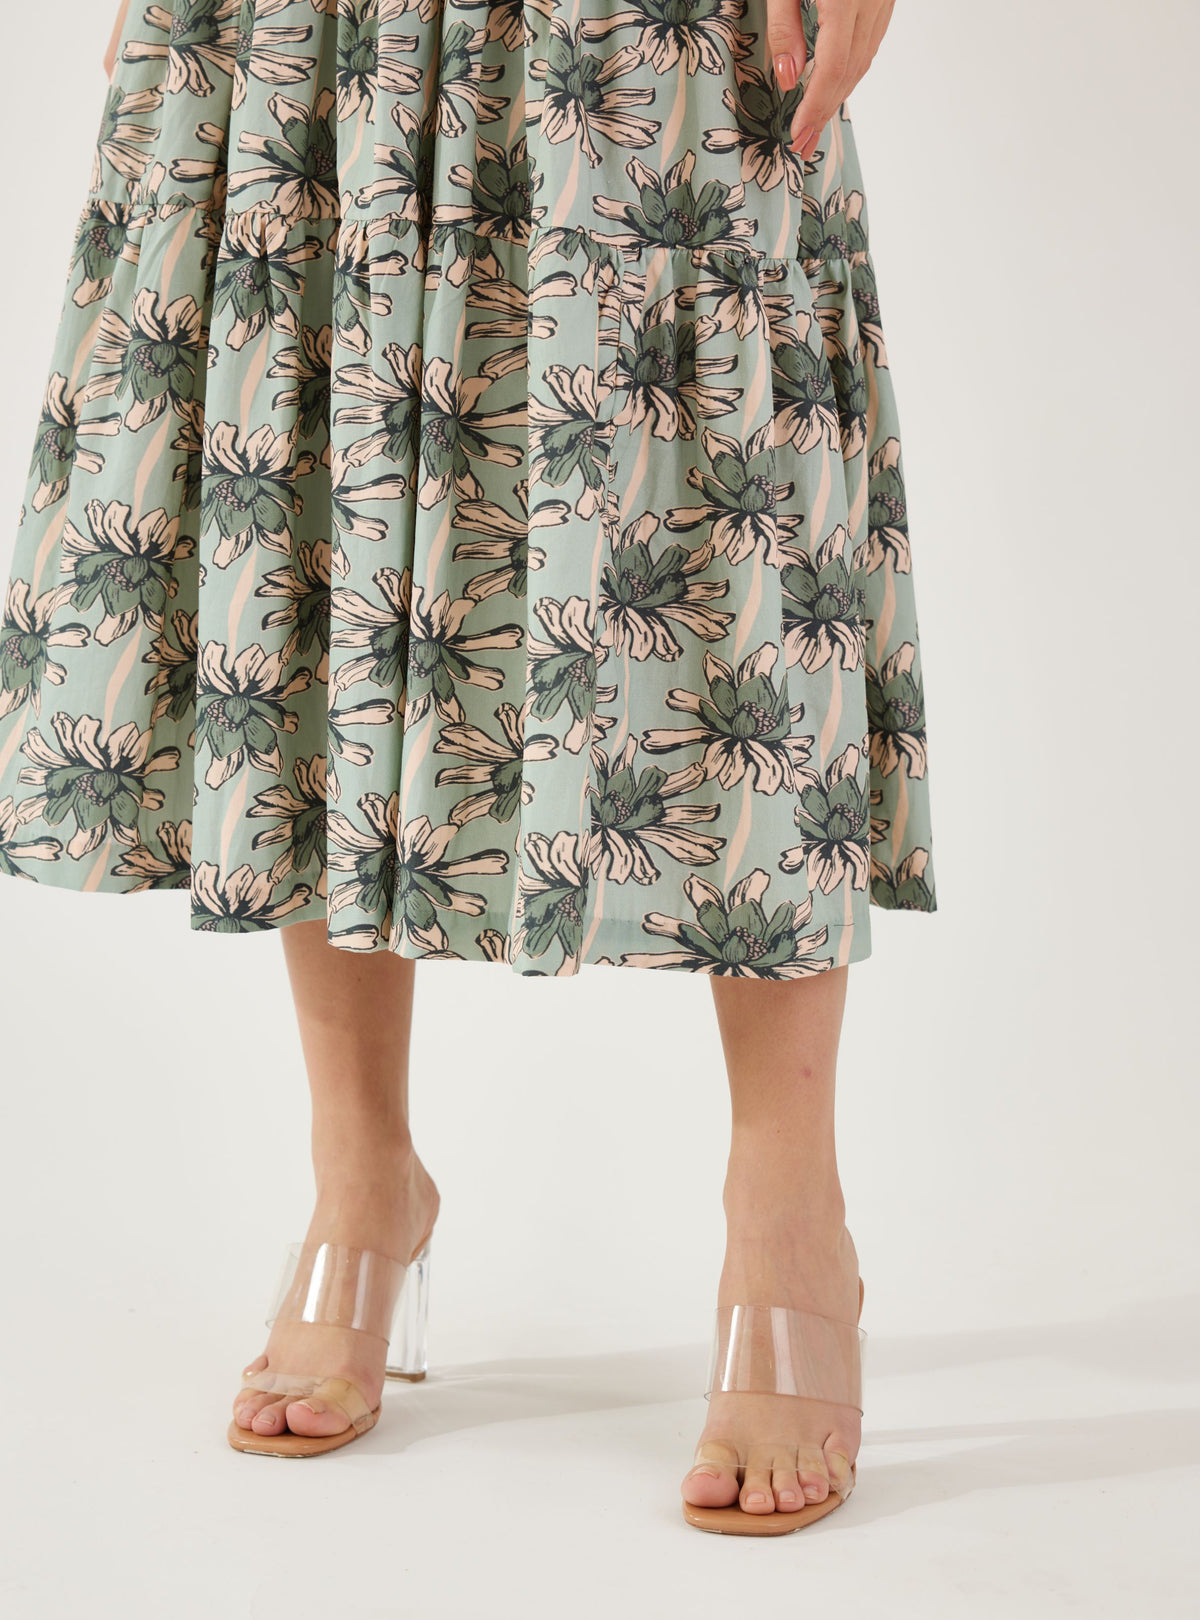 OLIVE AND GREEN FLORAL SLEEVELESS MIDI DRESS